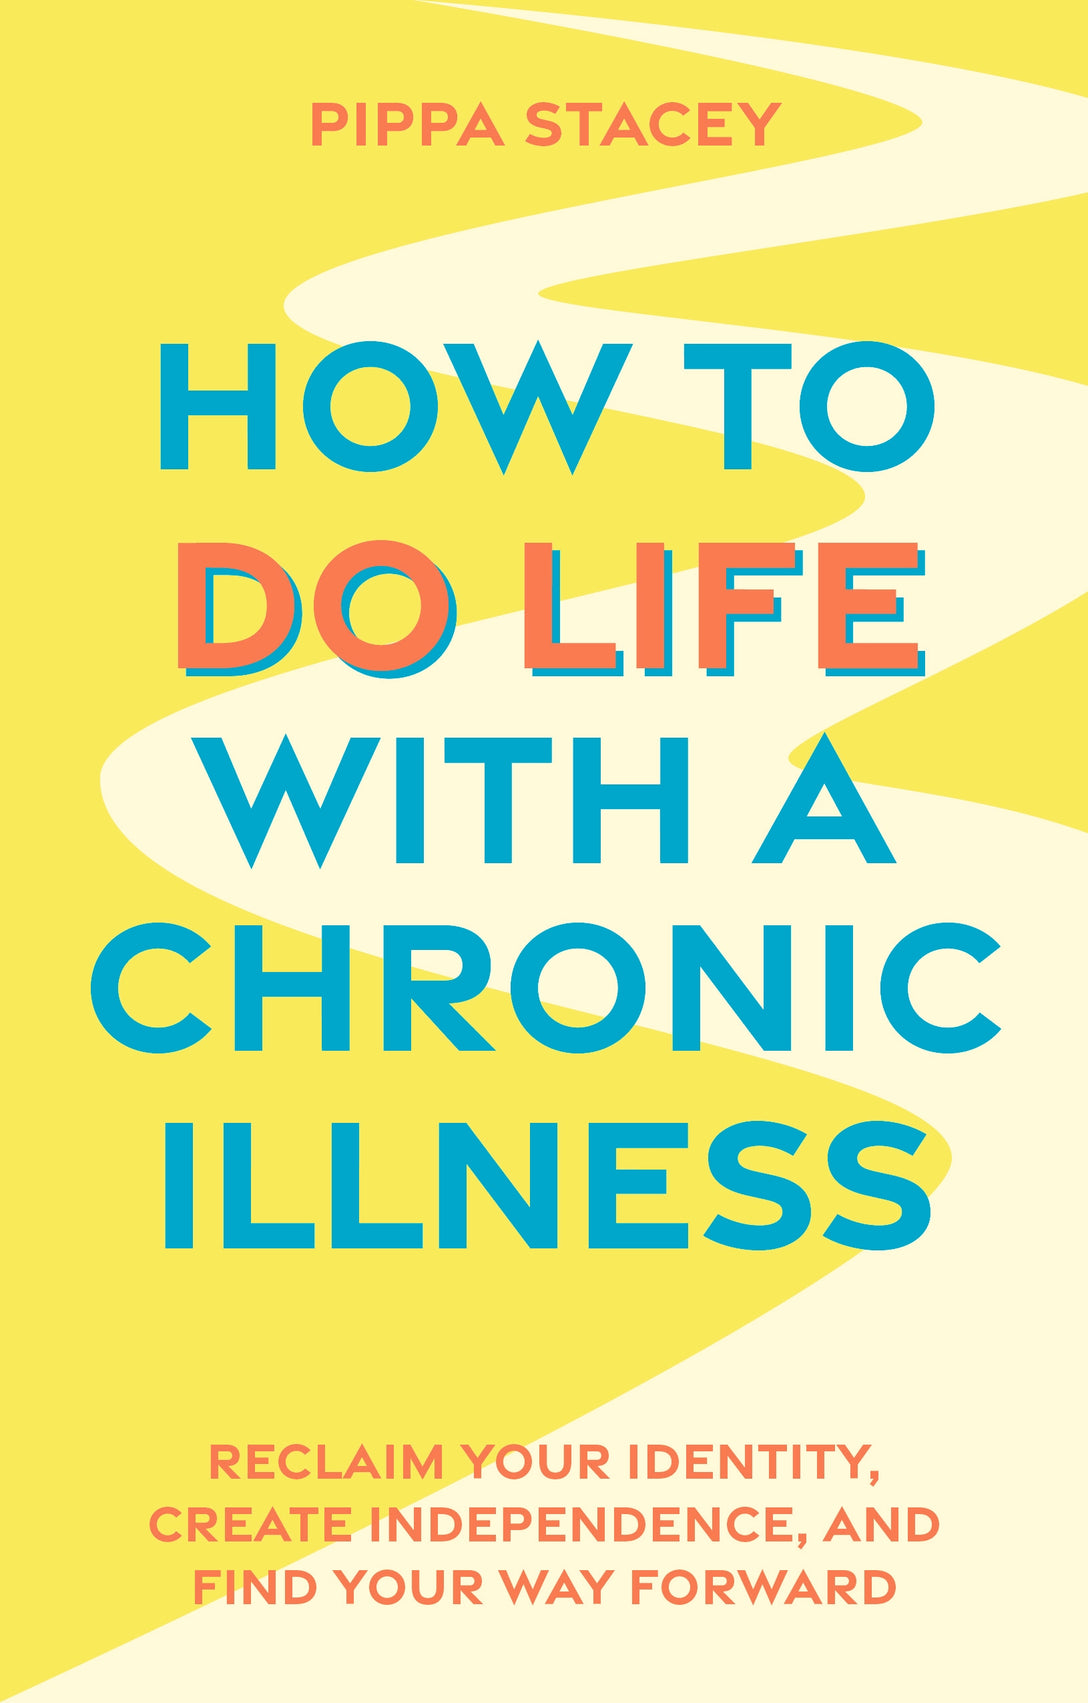 How to Do Life with a Chronic Illness by Pippa Stacey